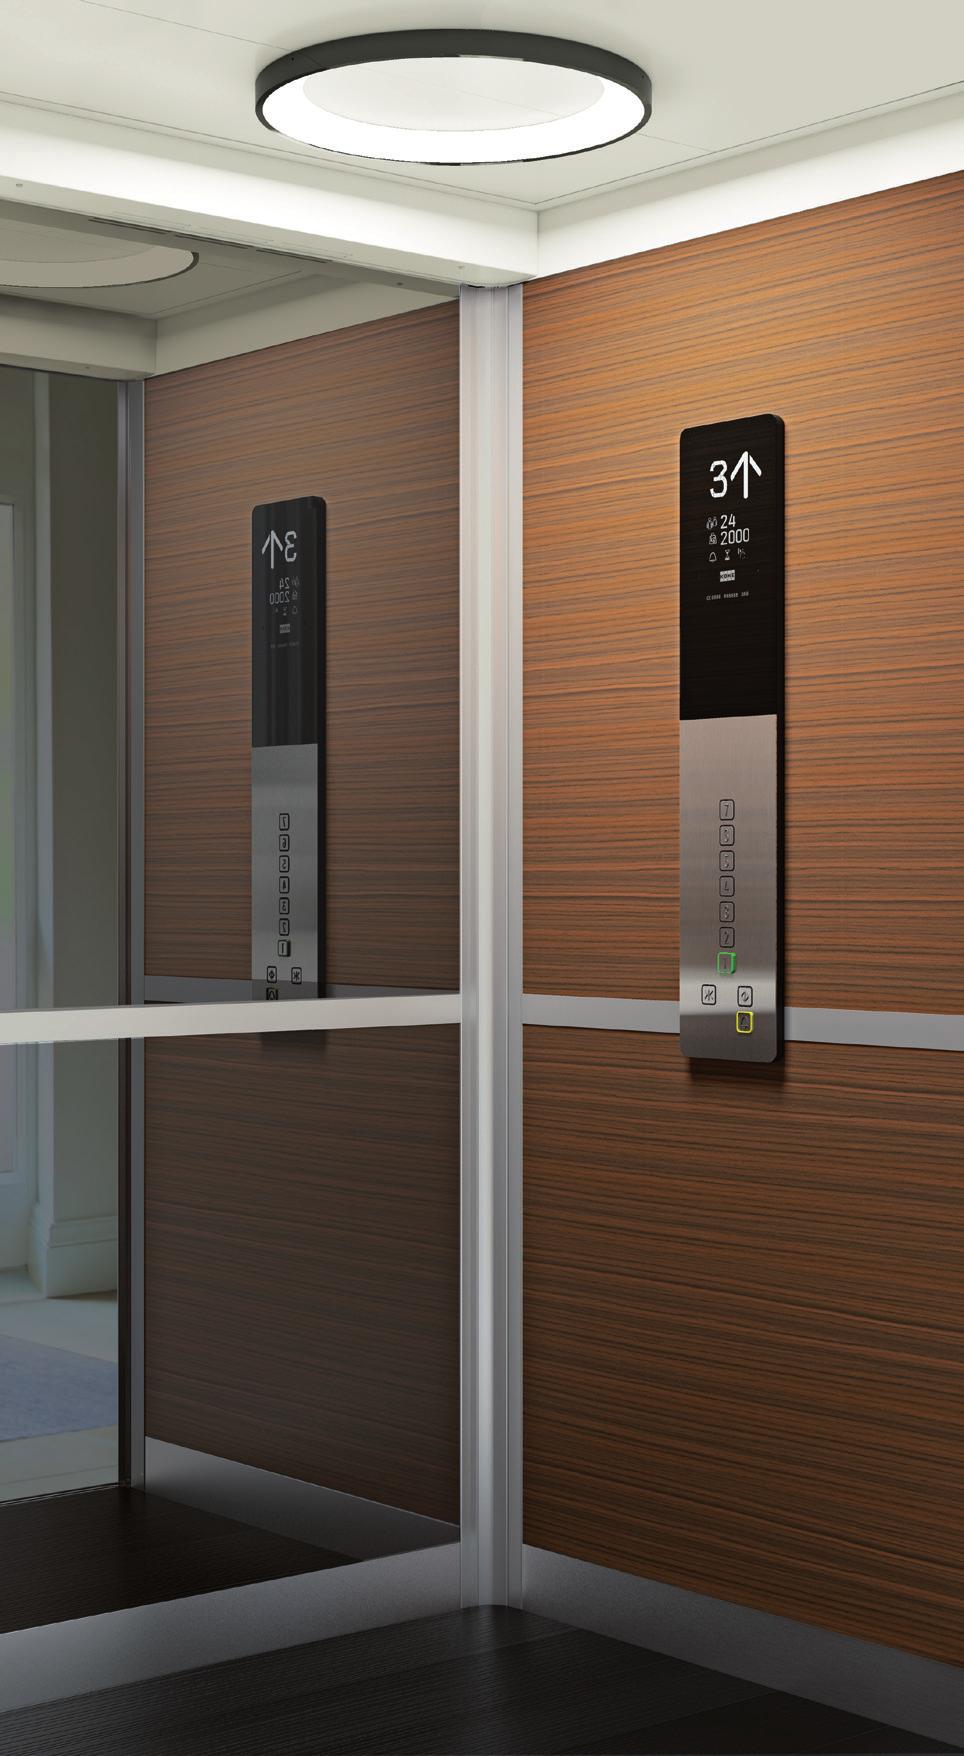 The most space-efficient elevator solution on the market An elevator is a necessary part of modern urban living.